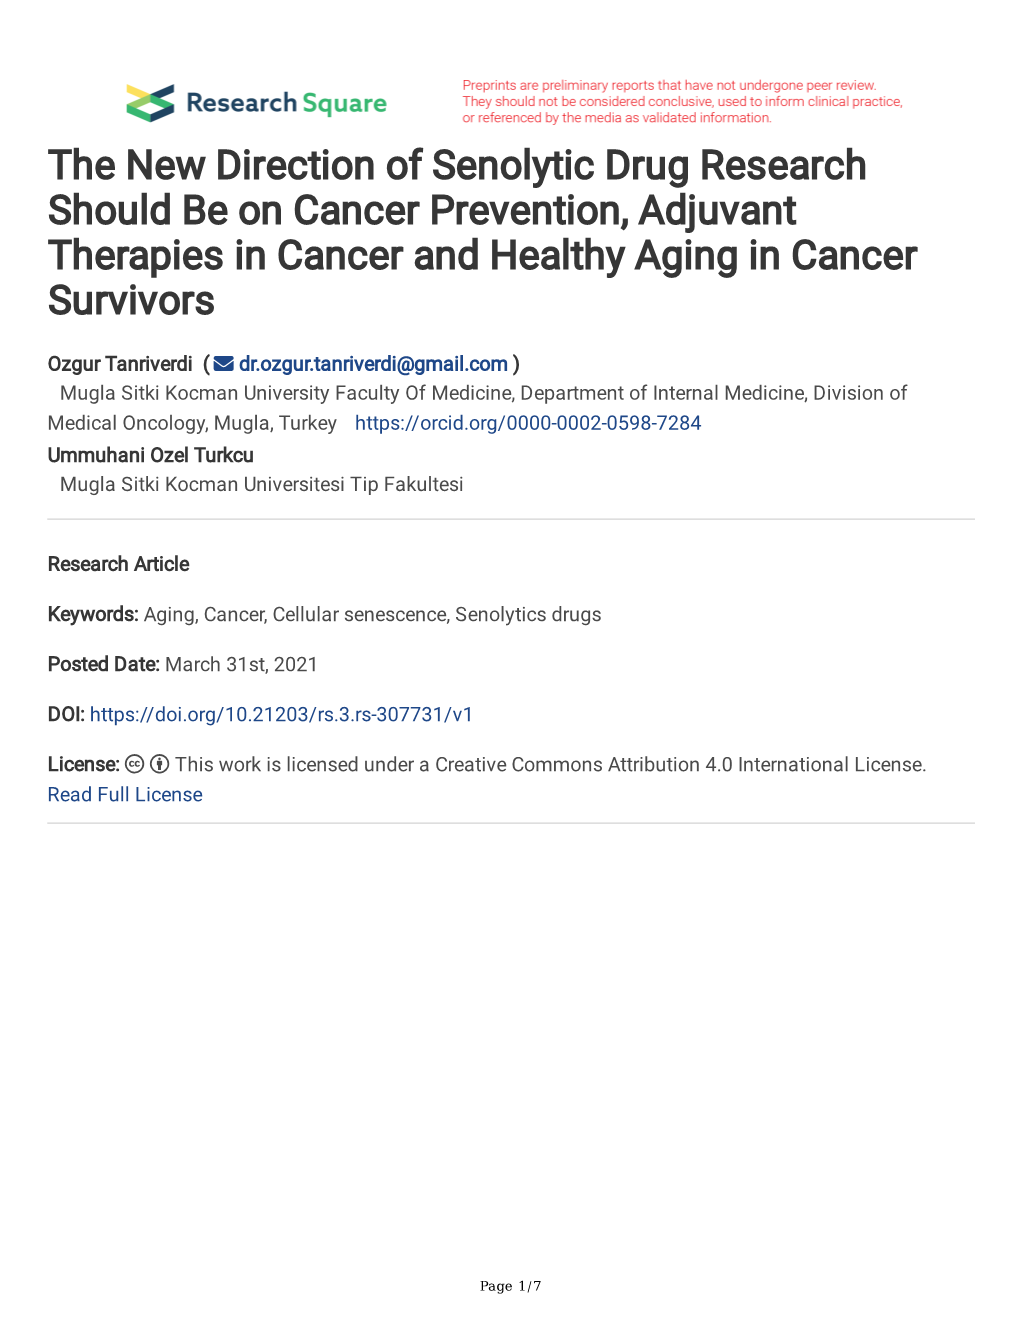 The New Direction of Senolytic Drug Research Should Be on Cancer Prevention, Adjuvant Therapies in Cancer and Healthy Aging in Cancer Survivors